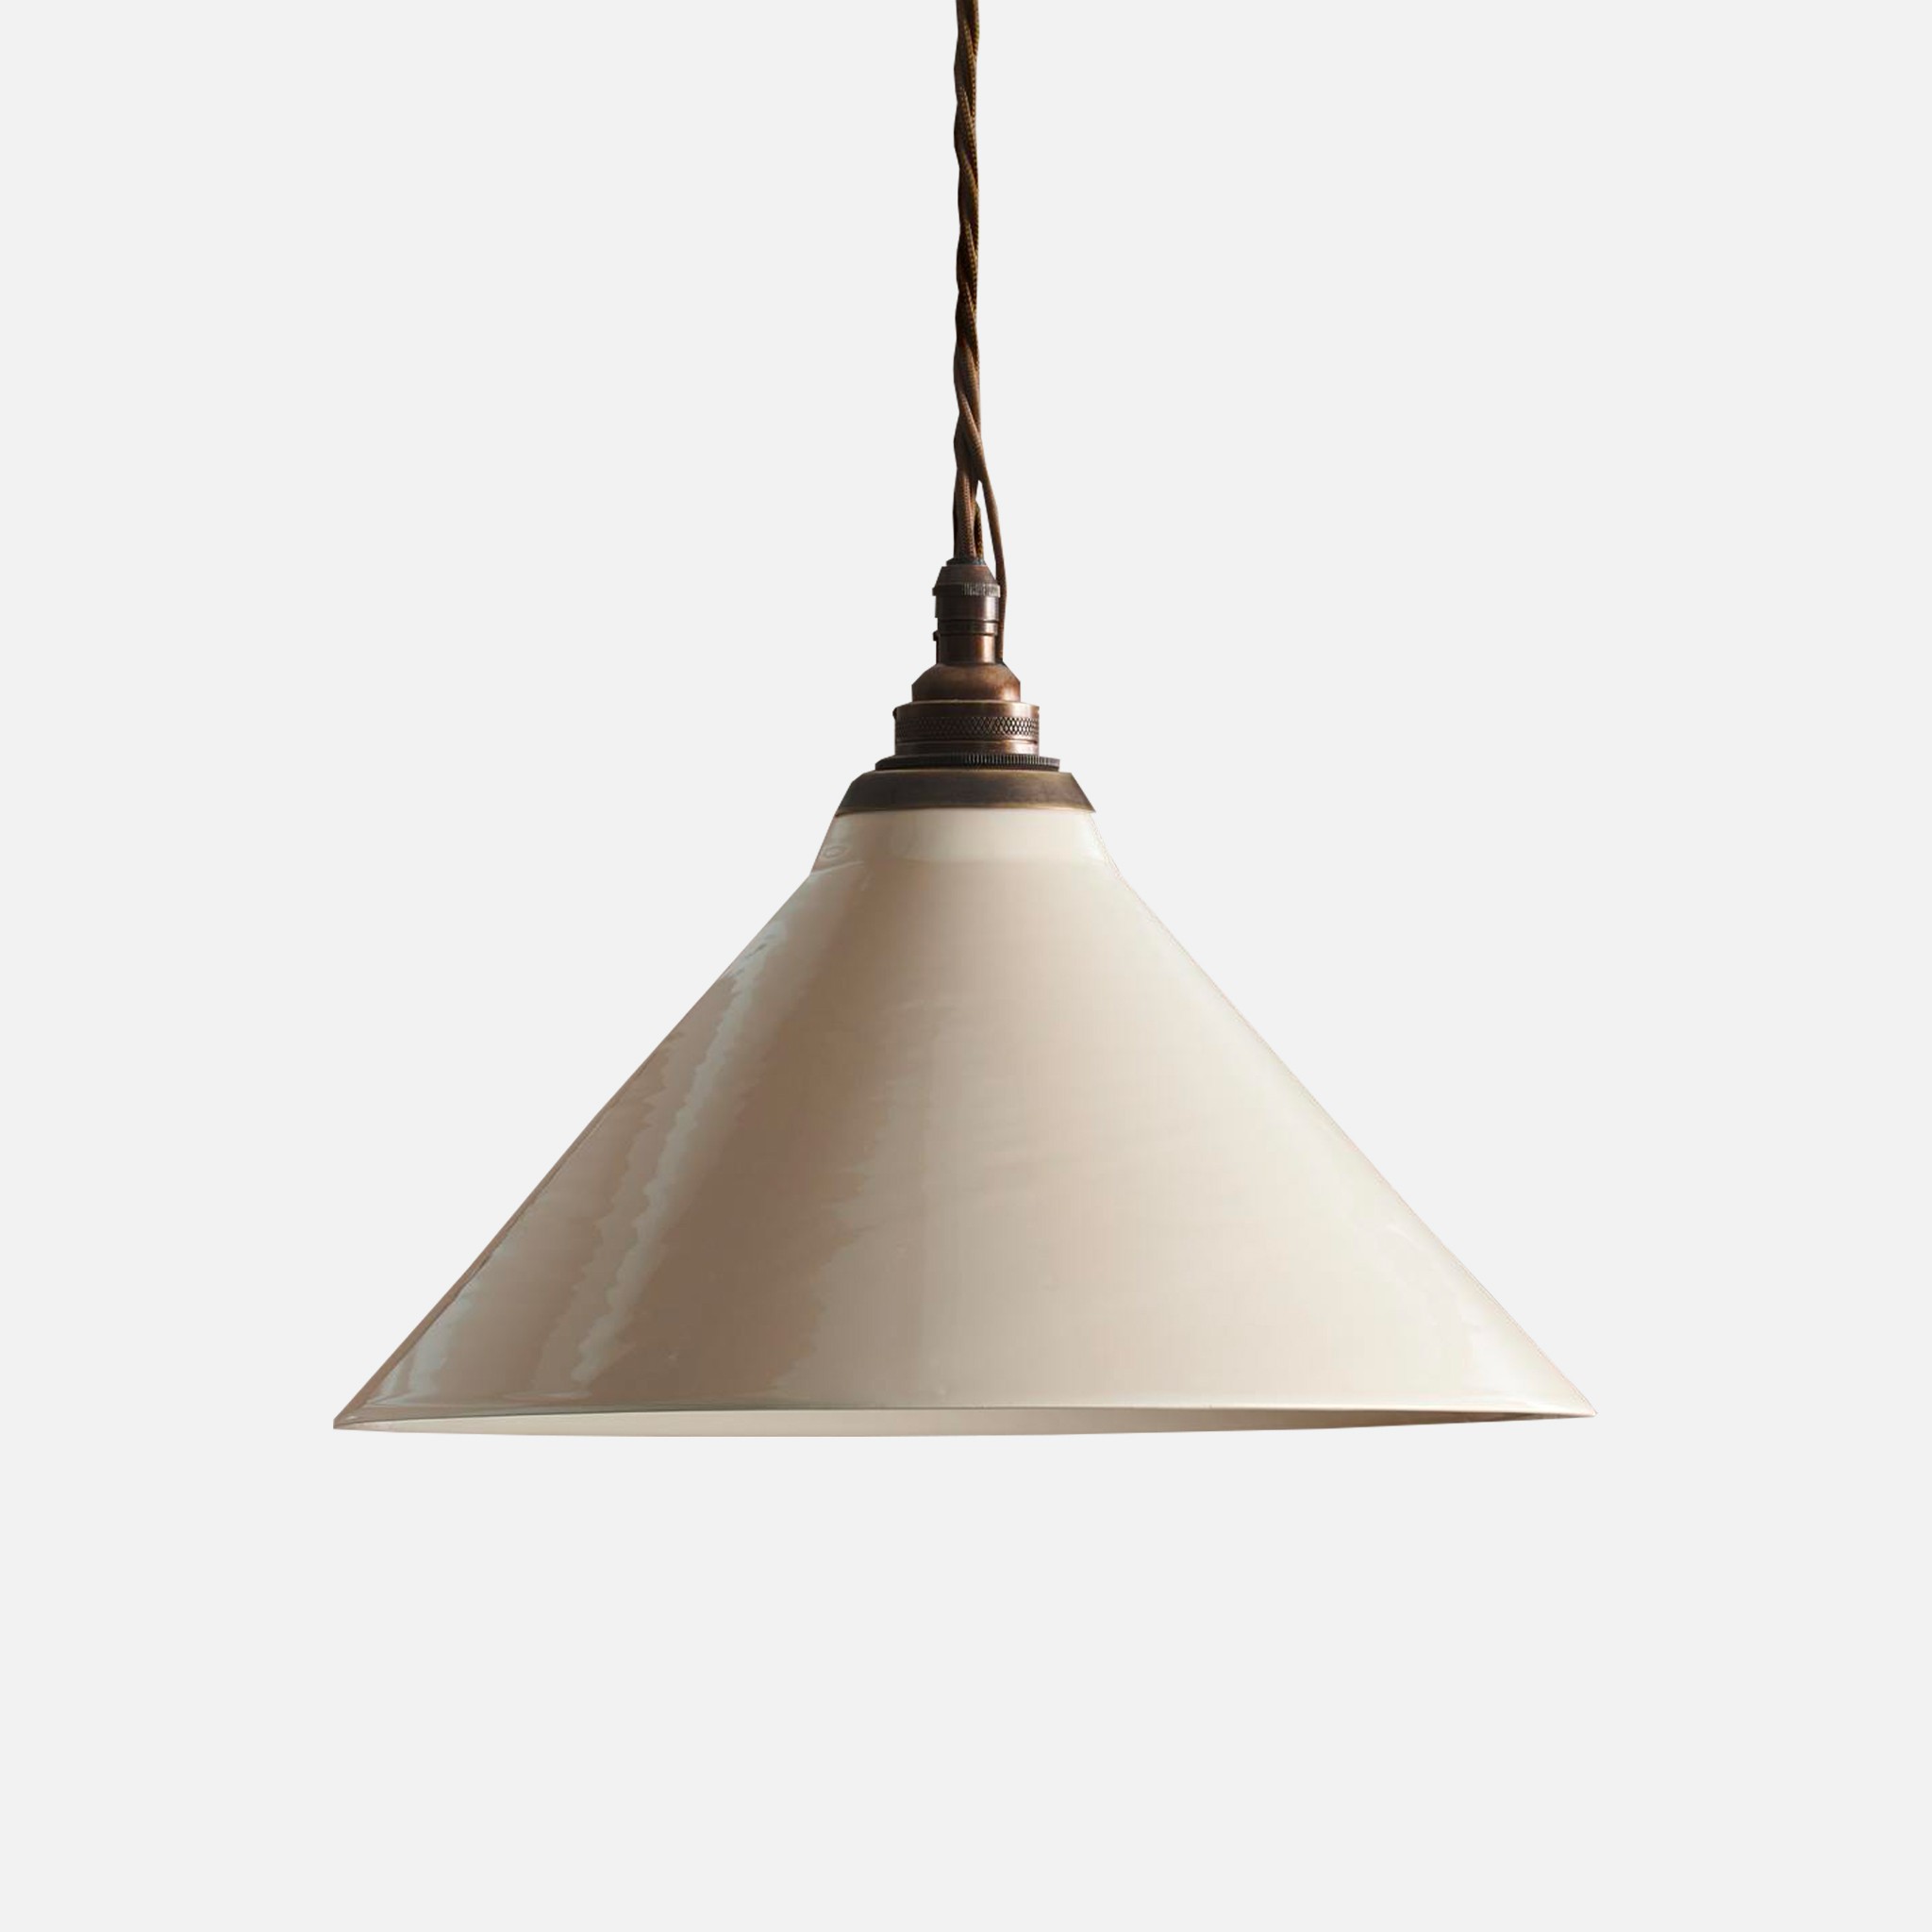 a white light hanging from a ceiling fixture